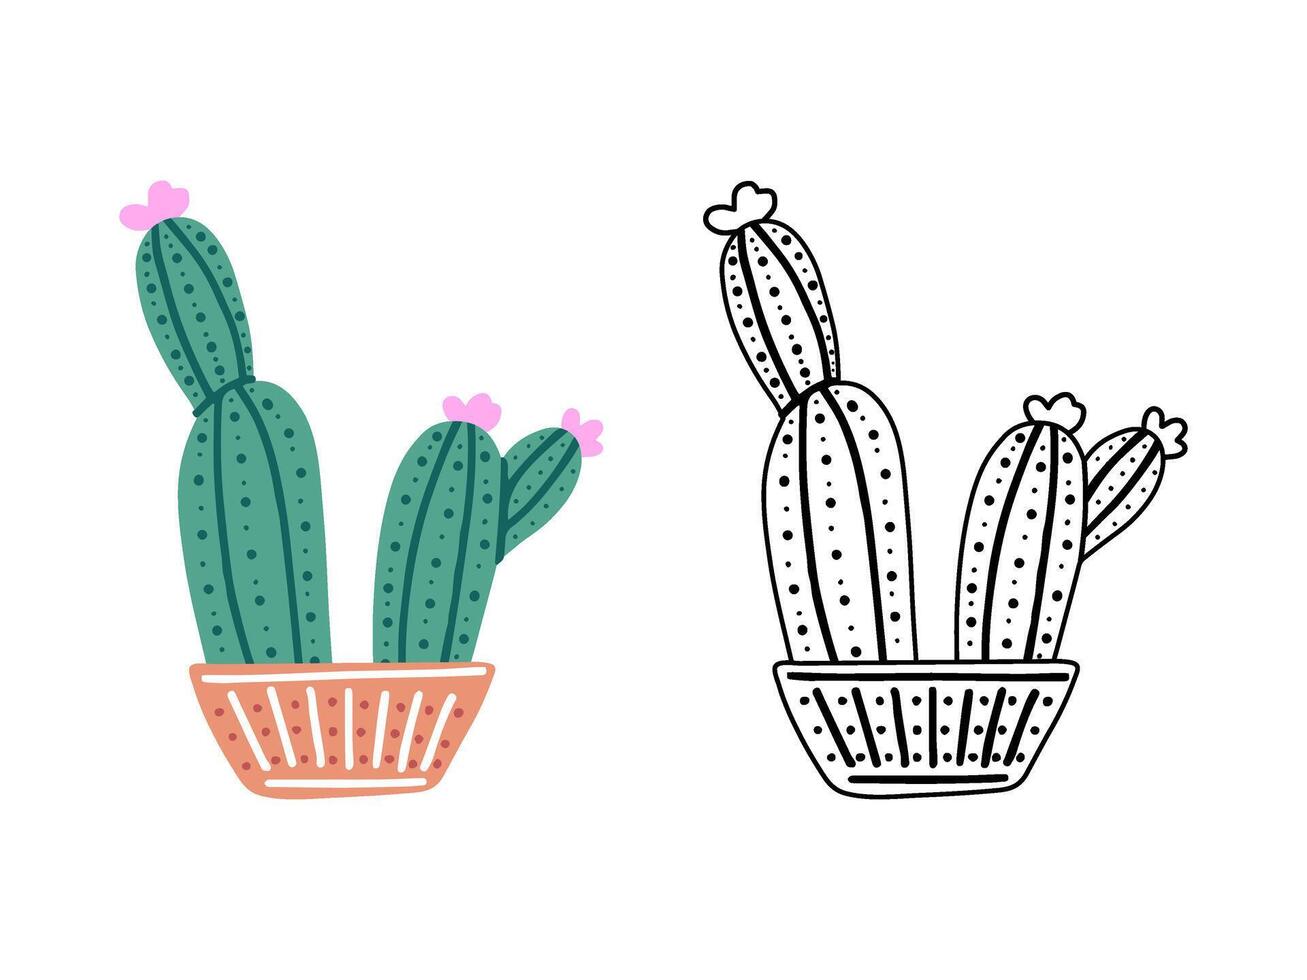 A set of hand-drawn outline and colored vector cacti isolated on white background. Doodle and flat style illustrations of spiny plants, blooming cactus, succulent plants in ceramic pots. Home plants